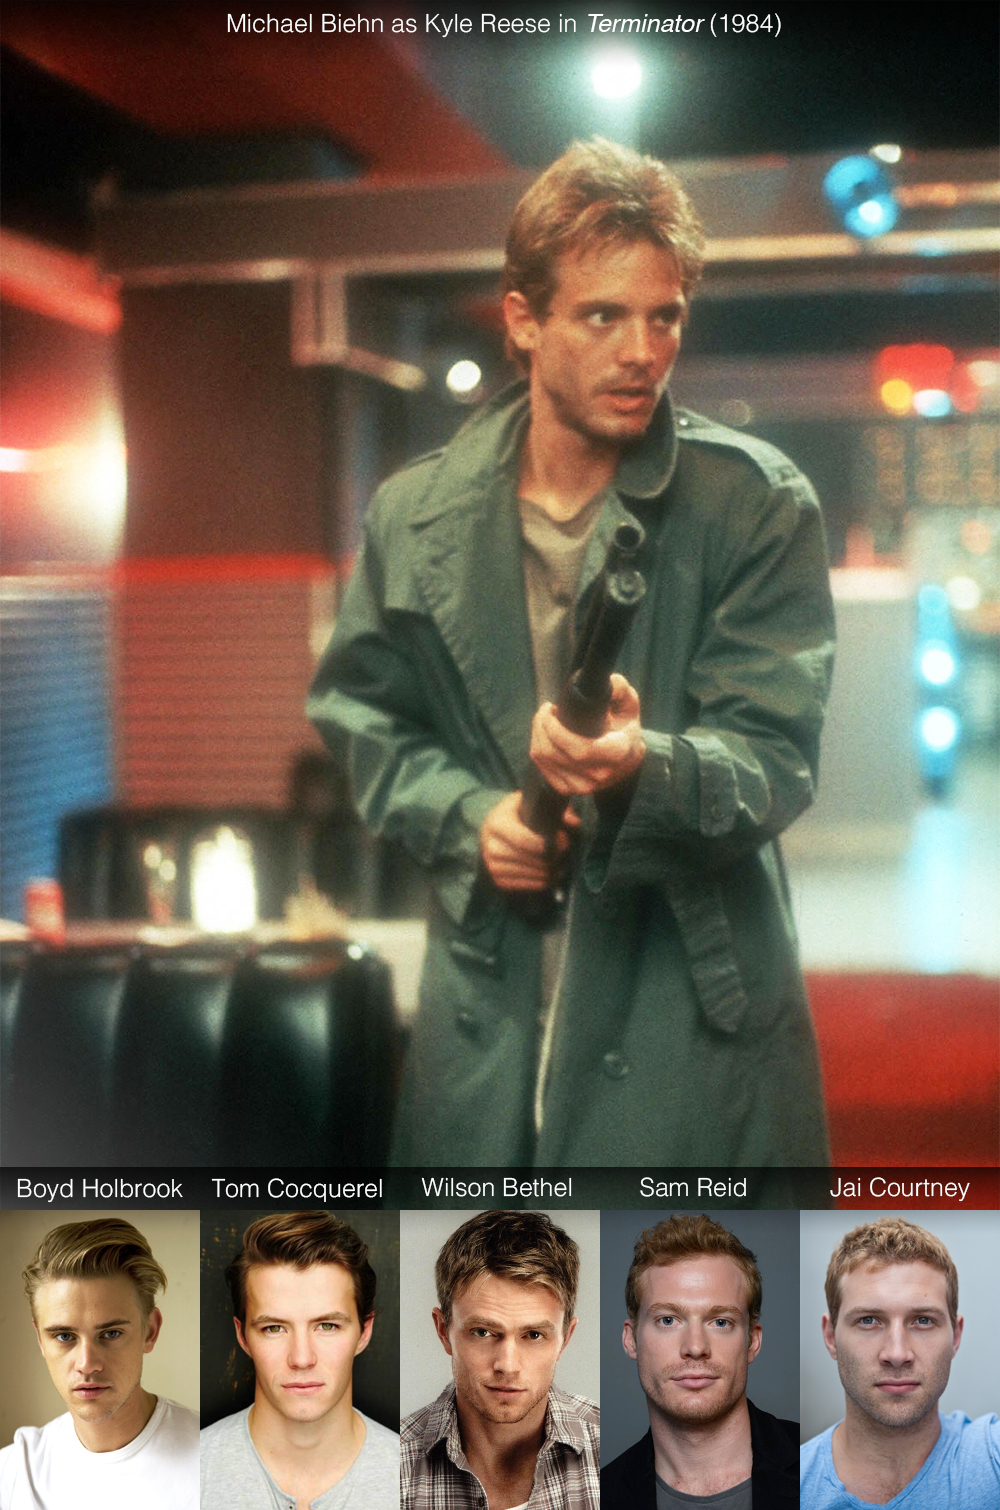 actors-up-for-the-role-of-kyle-reese-in-terminator-genesis.jpg